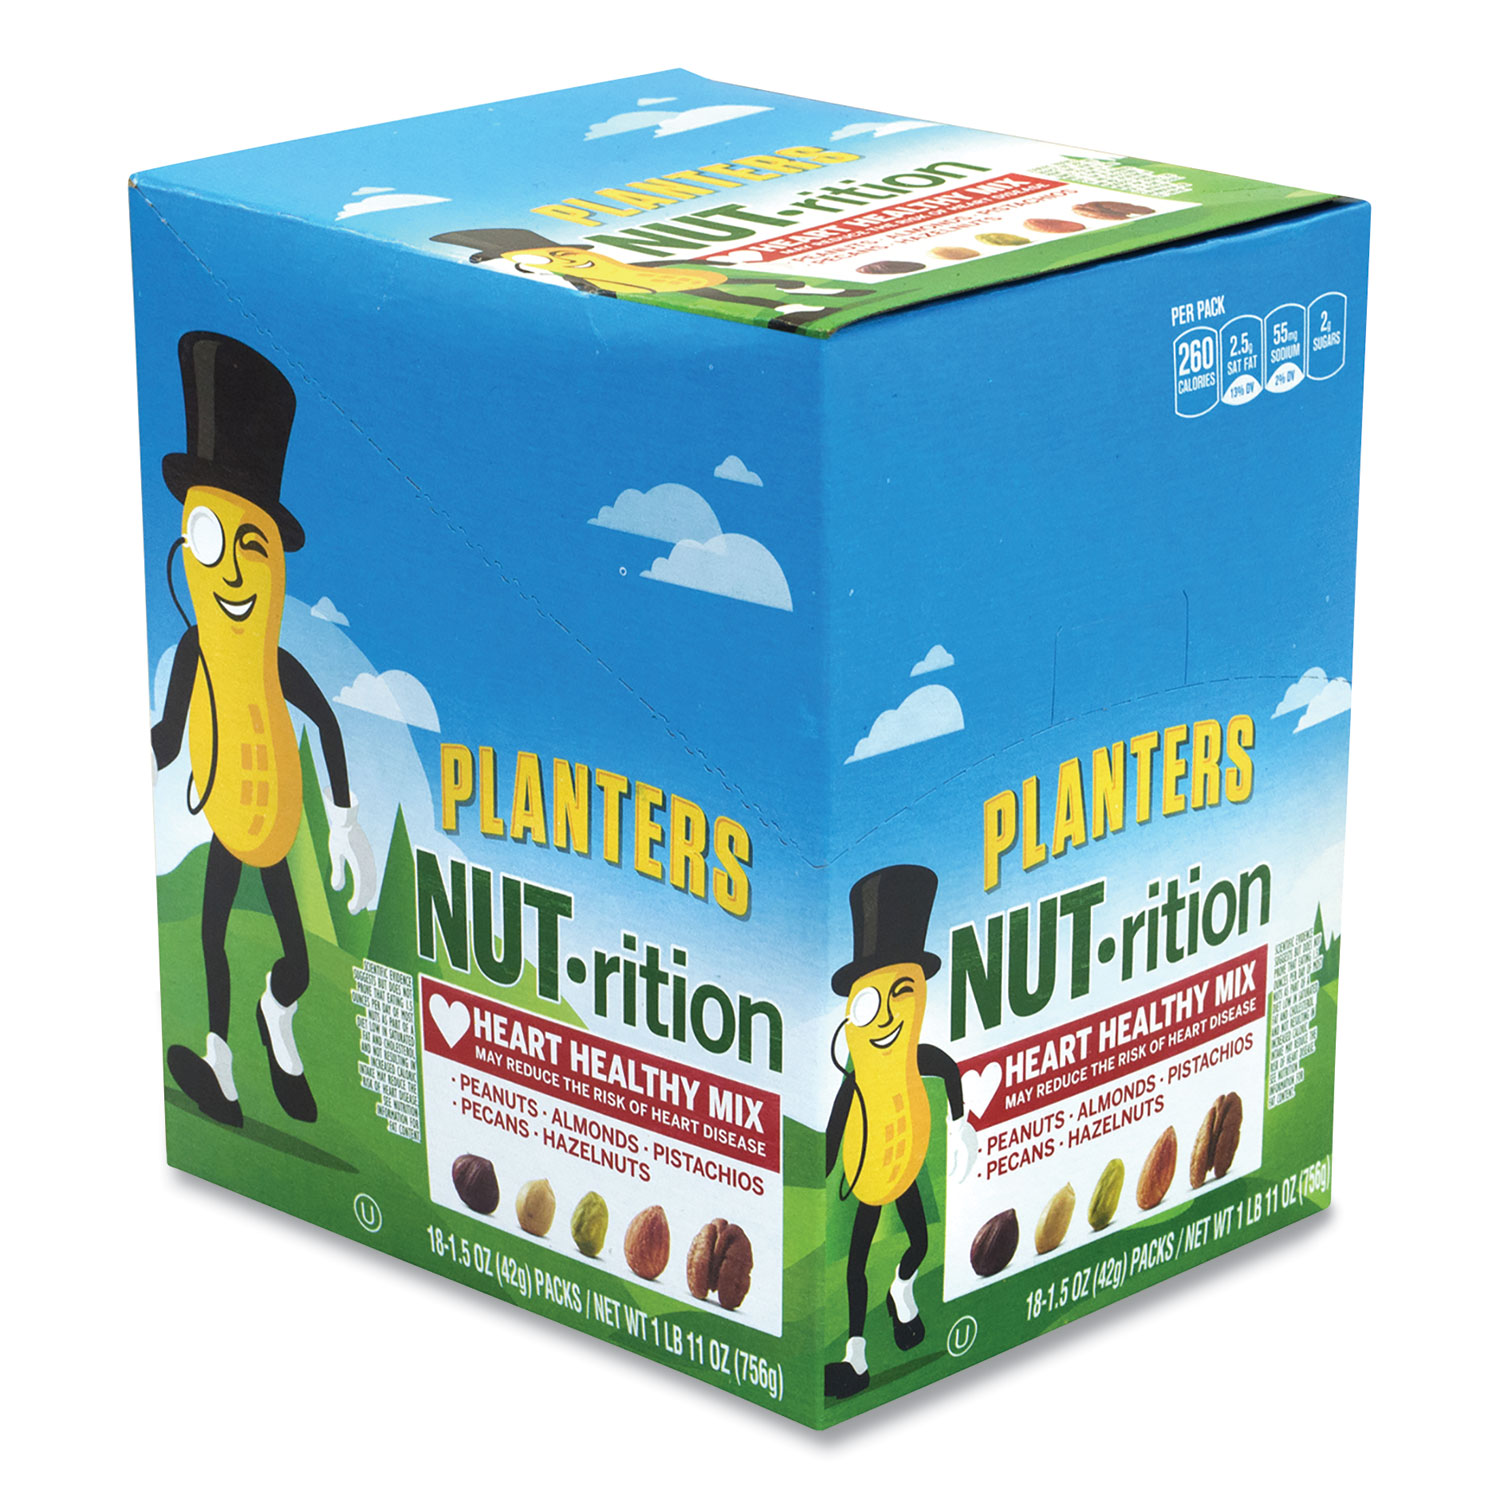  Planters 1718 NUT-rition Heart Healthy Mix, 1.5 oz Tube, 18 Tubes/Box, Free Delivery in 1-4 Business Days (GRR30700008) 